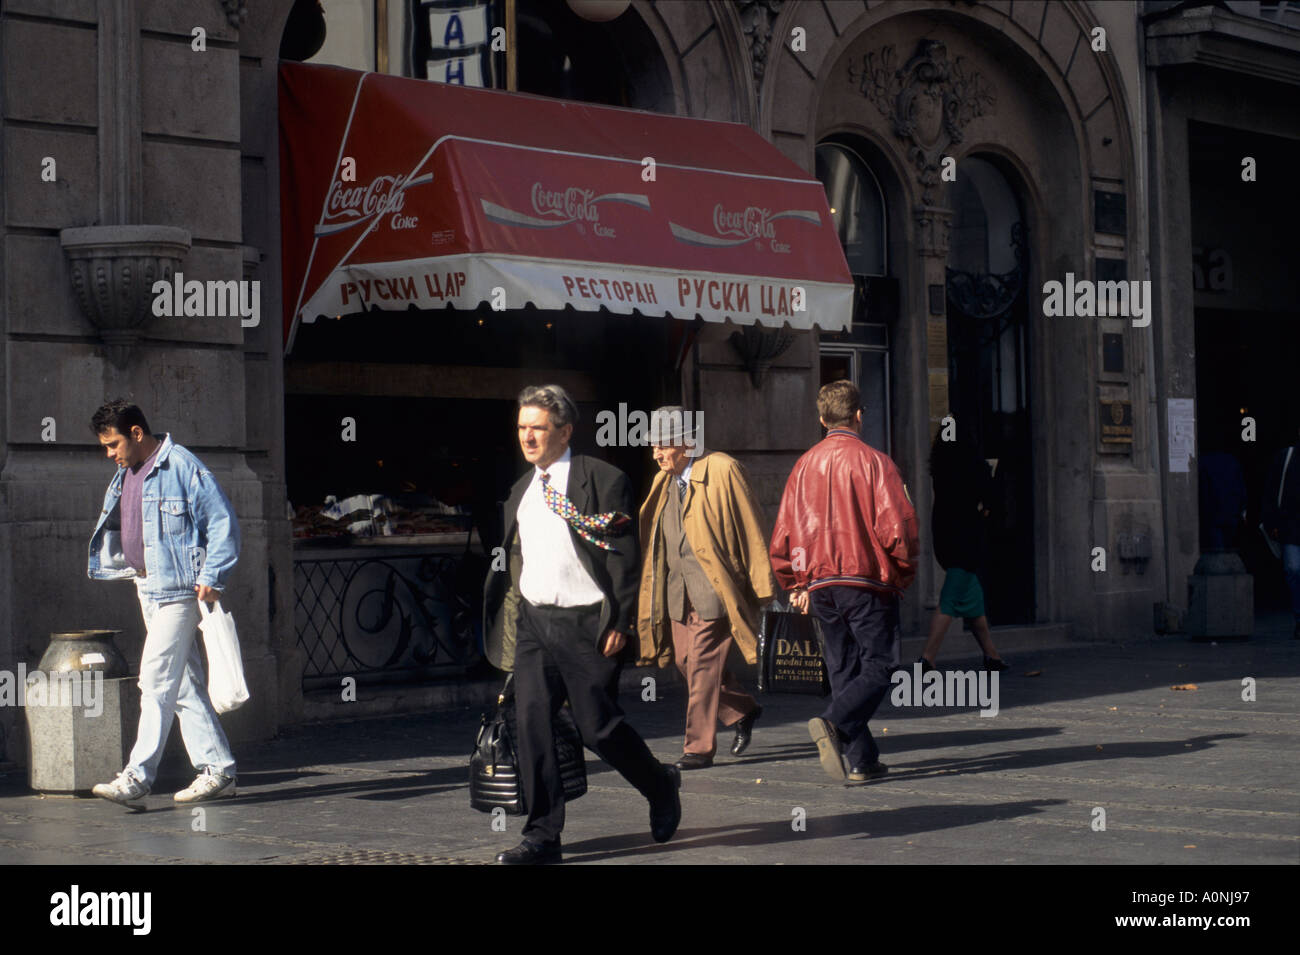 Belgrade, Serbia. People walking on the  street front of the restaurant called Russian Tsar. Stock Photo